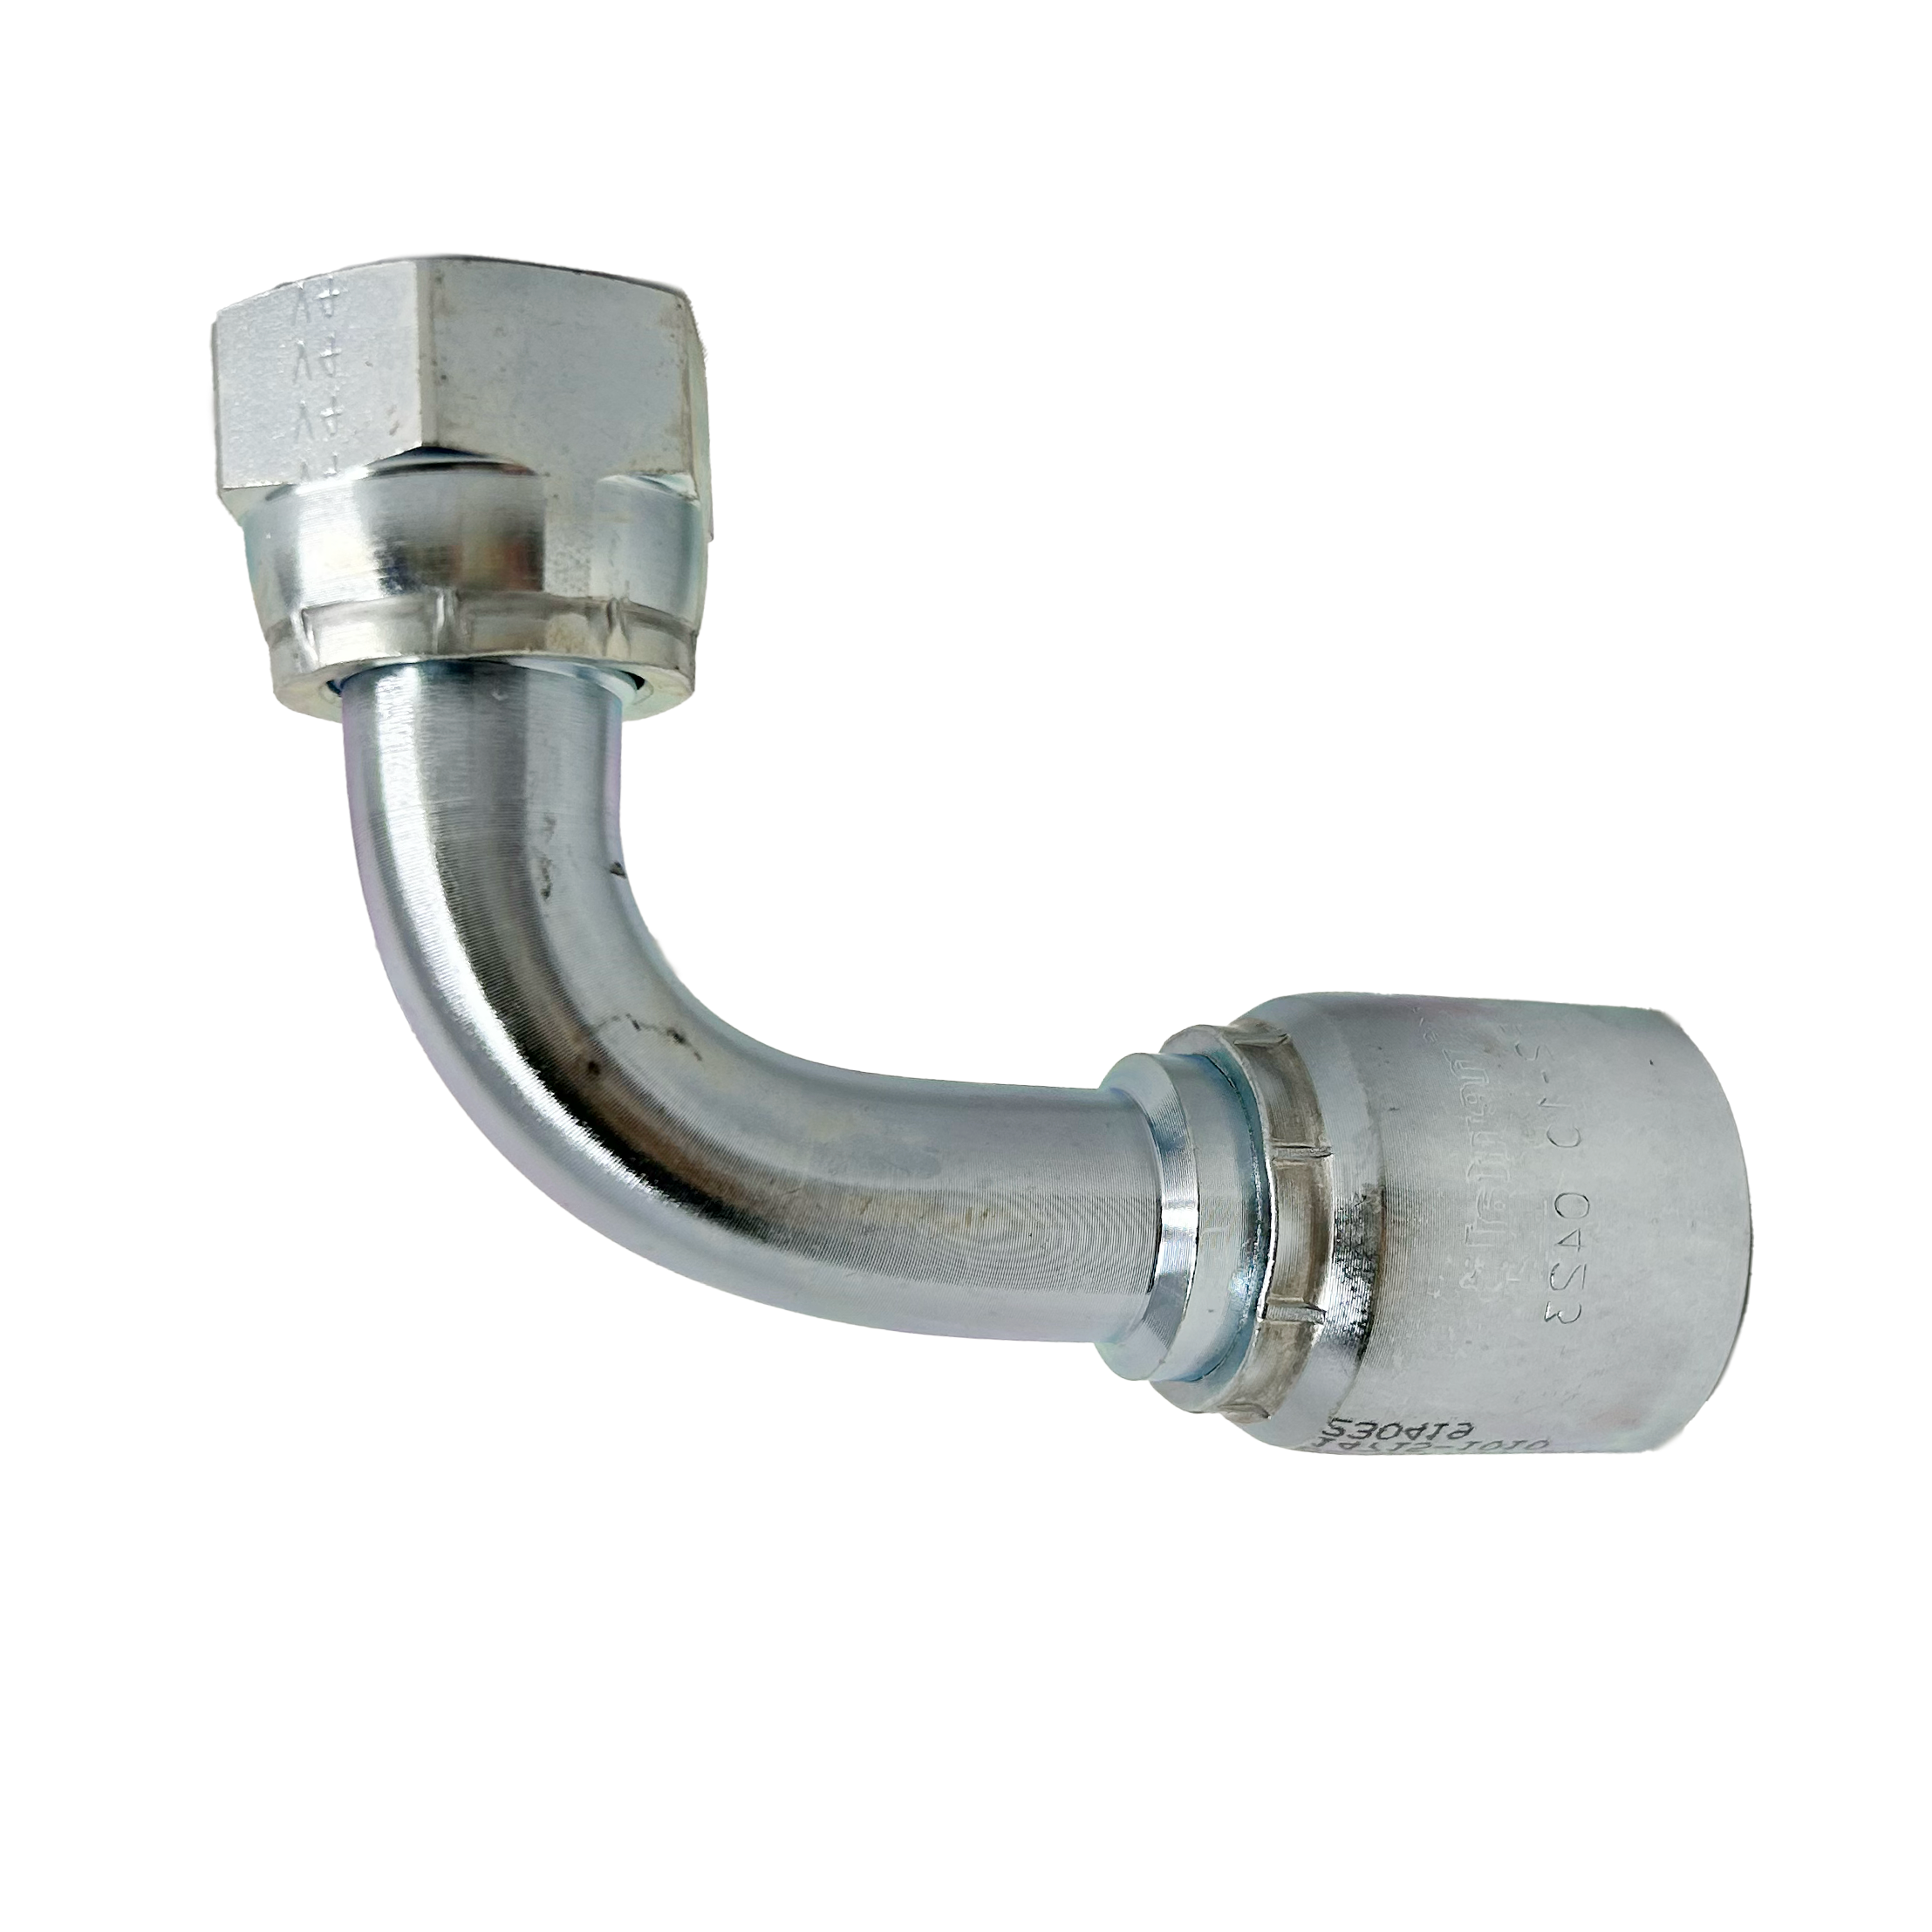 B2-OFFX90-1010: Continental Hose Fitting, 0.625 (5/8") Hose ID x 1-14 Female ORFS, 90-Degree Swivel Connection